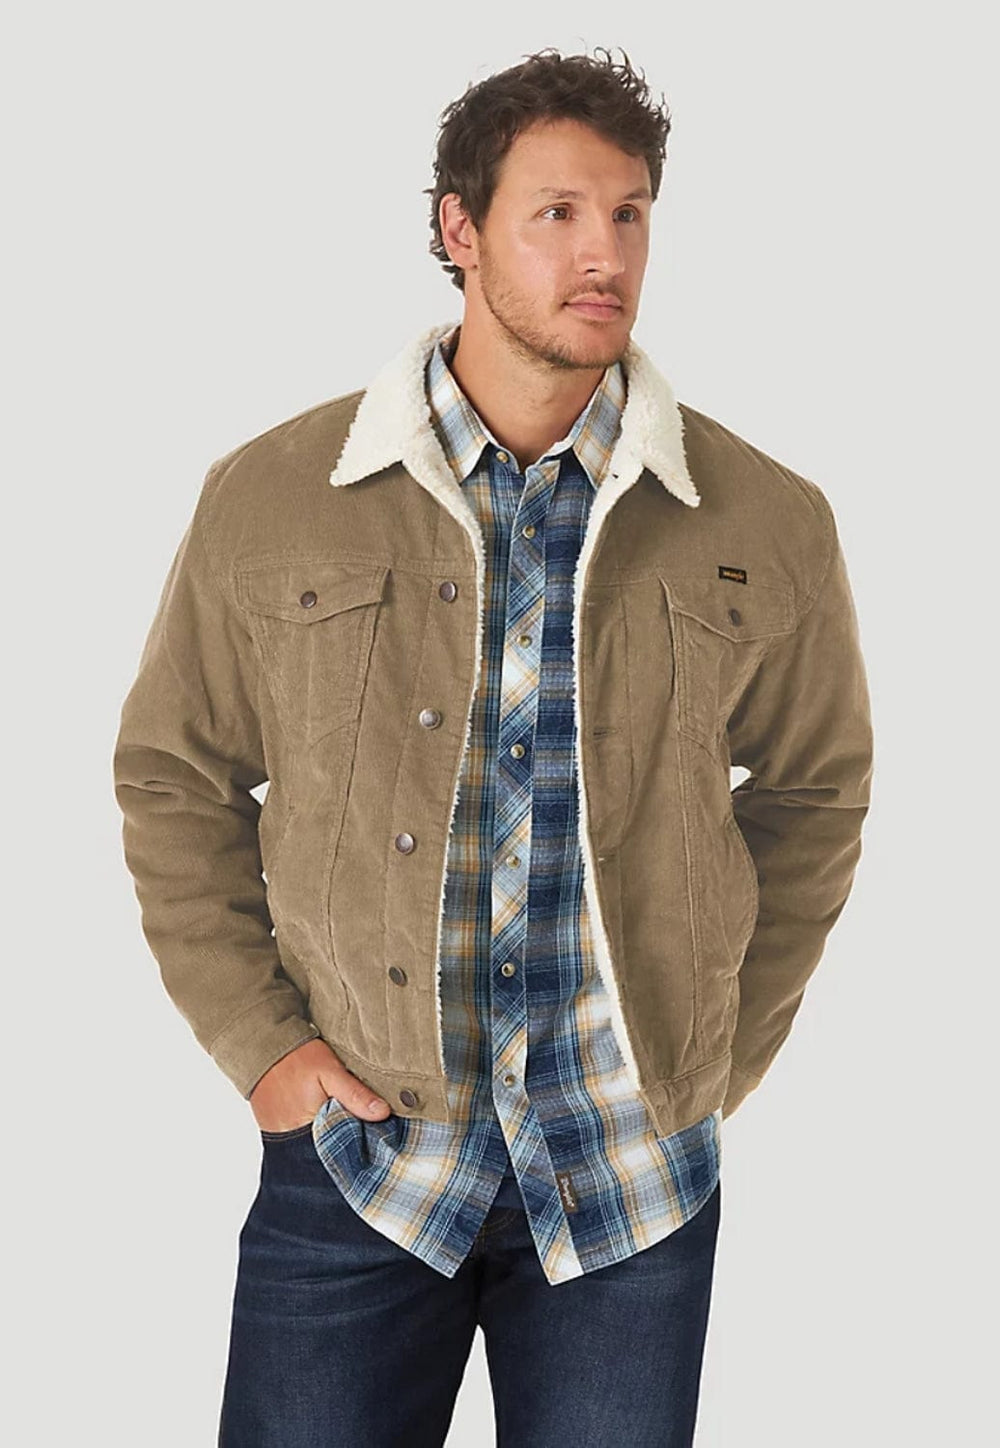 Men’s Western and Country Jackets - W. Titley & Co